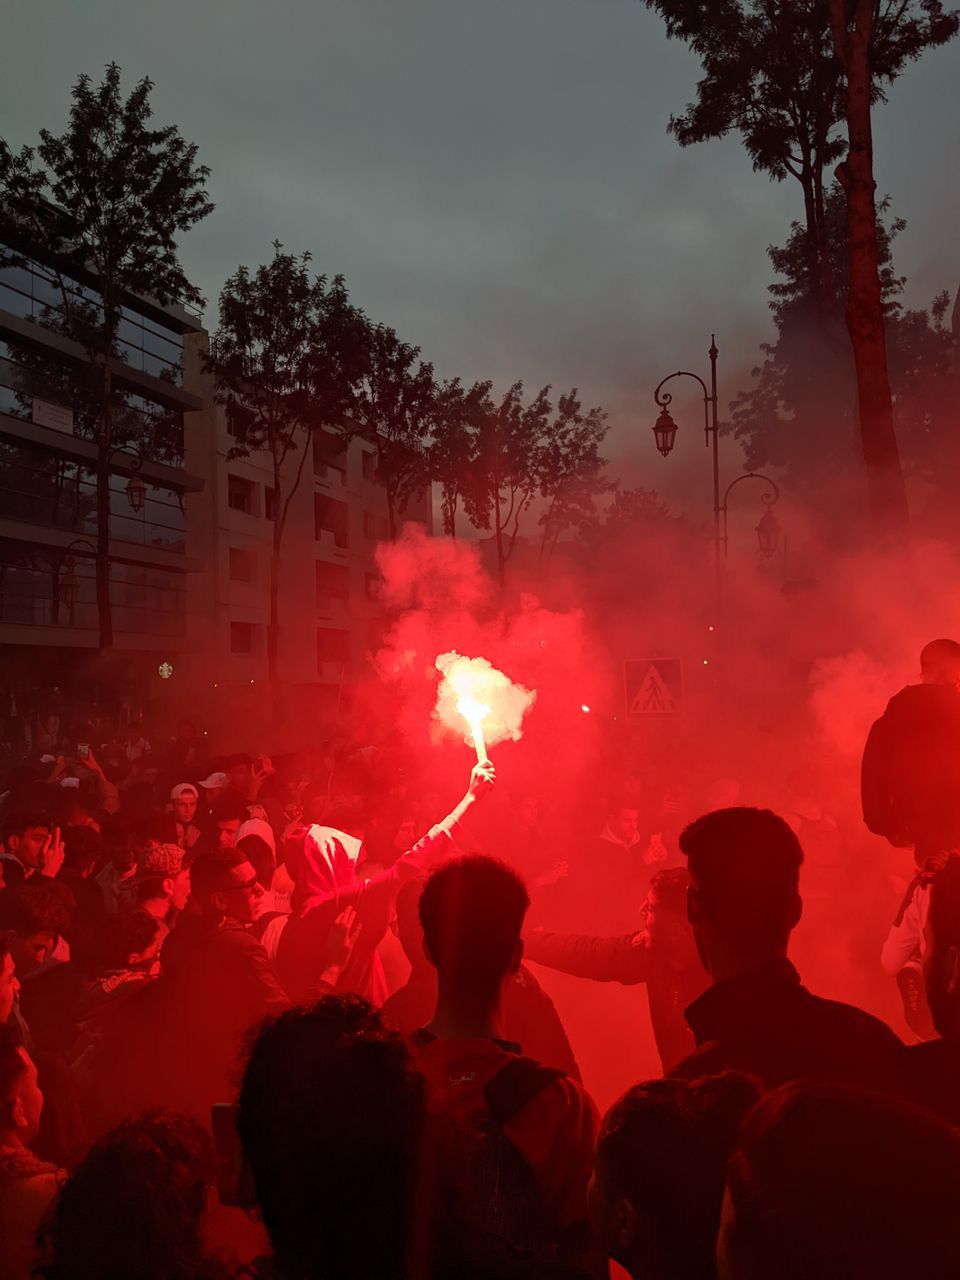 A crowd in the street at night with a red flare shooting up